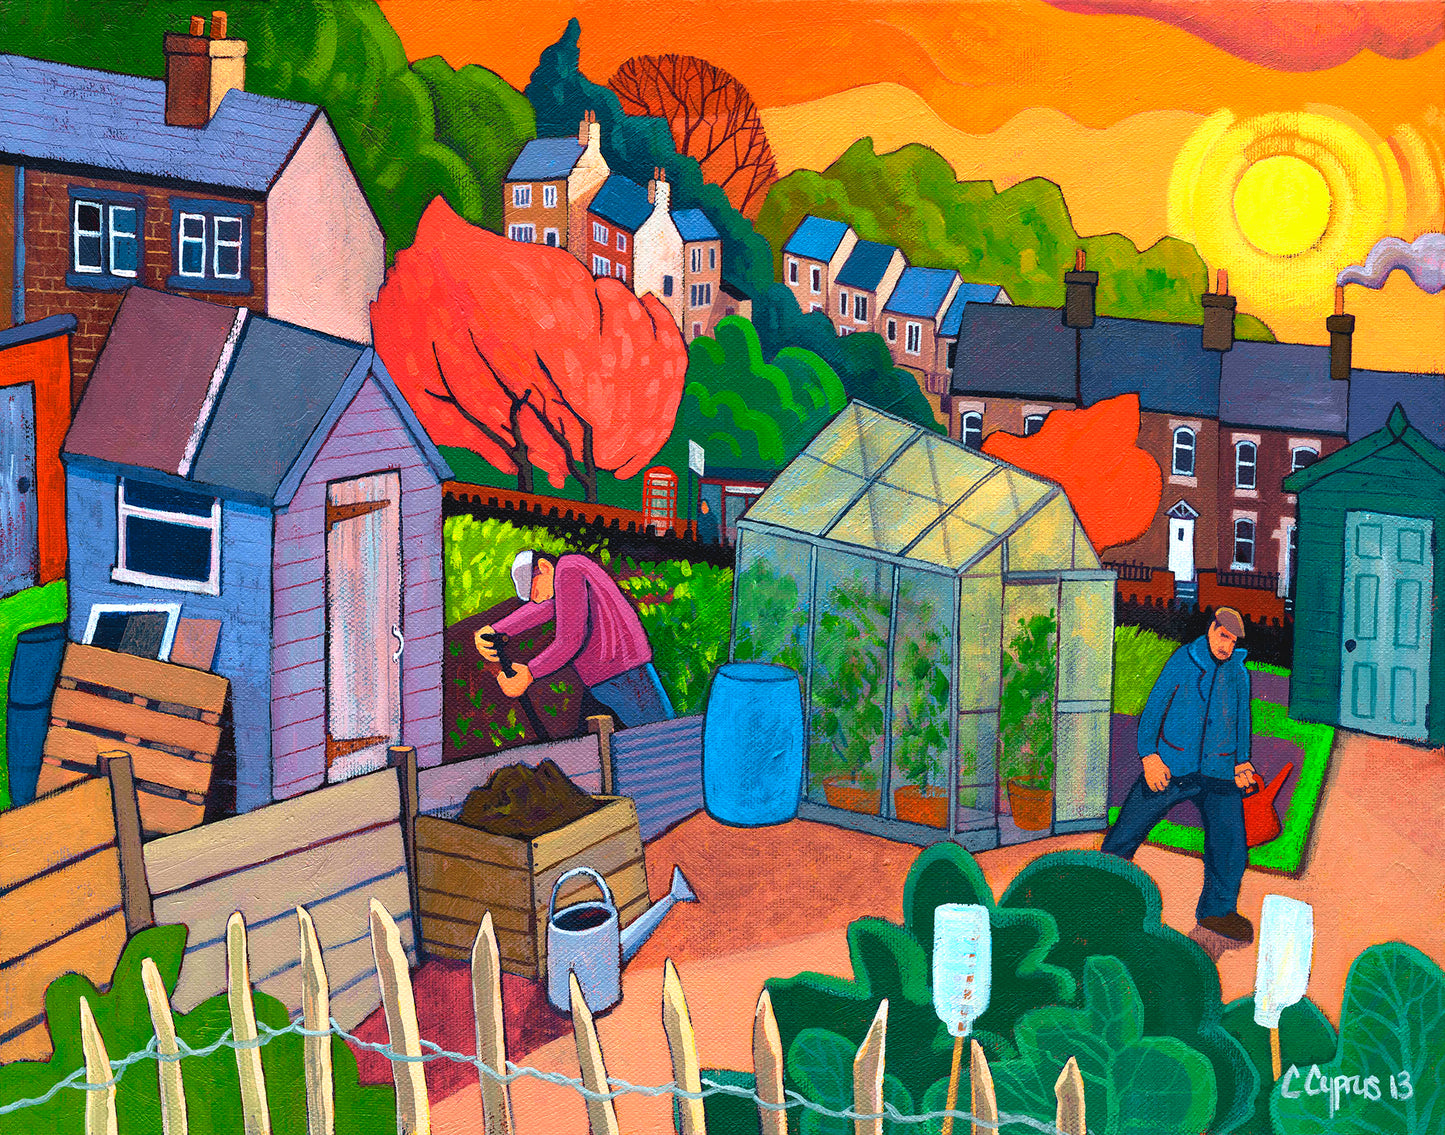 'The Longest Day' Oils on canvas by famous artist Chris Cyprus. features a vivid allotment scene at dusk with sheds, narrow terraced houses and 2 old boys working the land. © Chris Cyprus 2013 archive